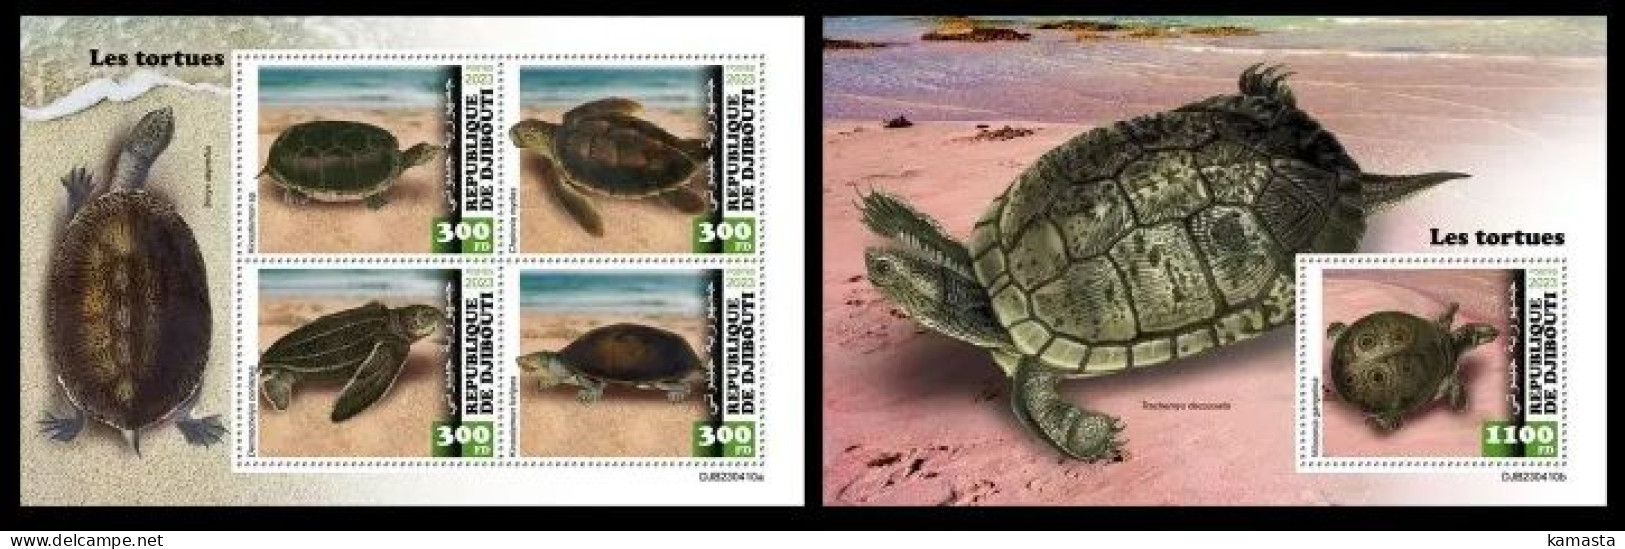 Djibouti 2023 Turtles. (410) OFFICIAL ISSUE - Turtles